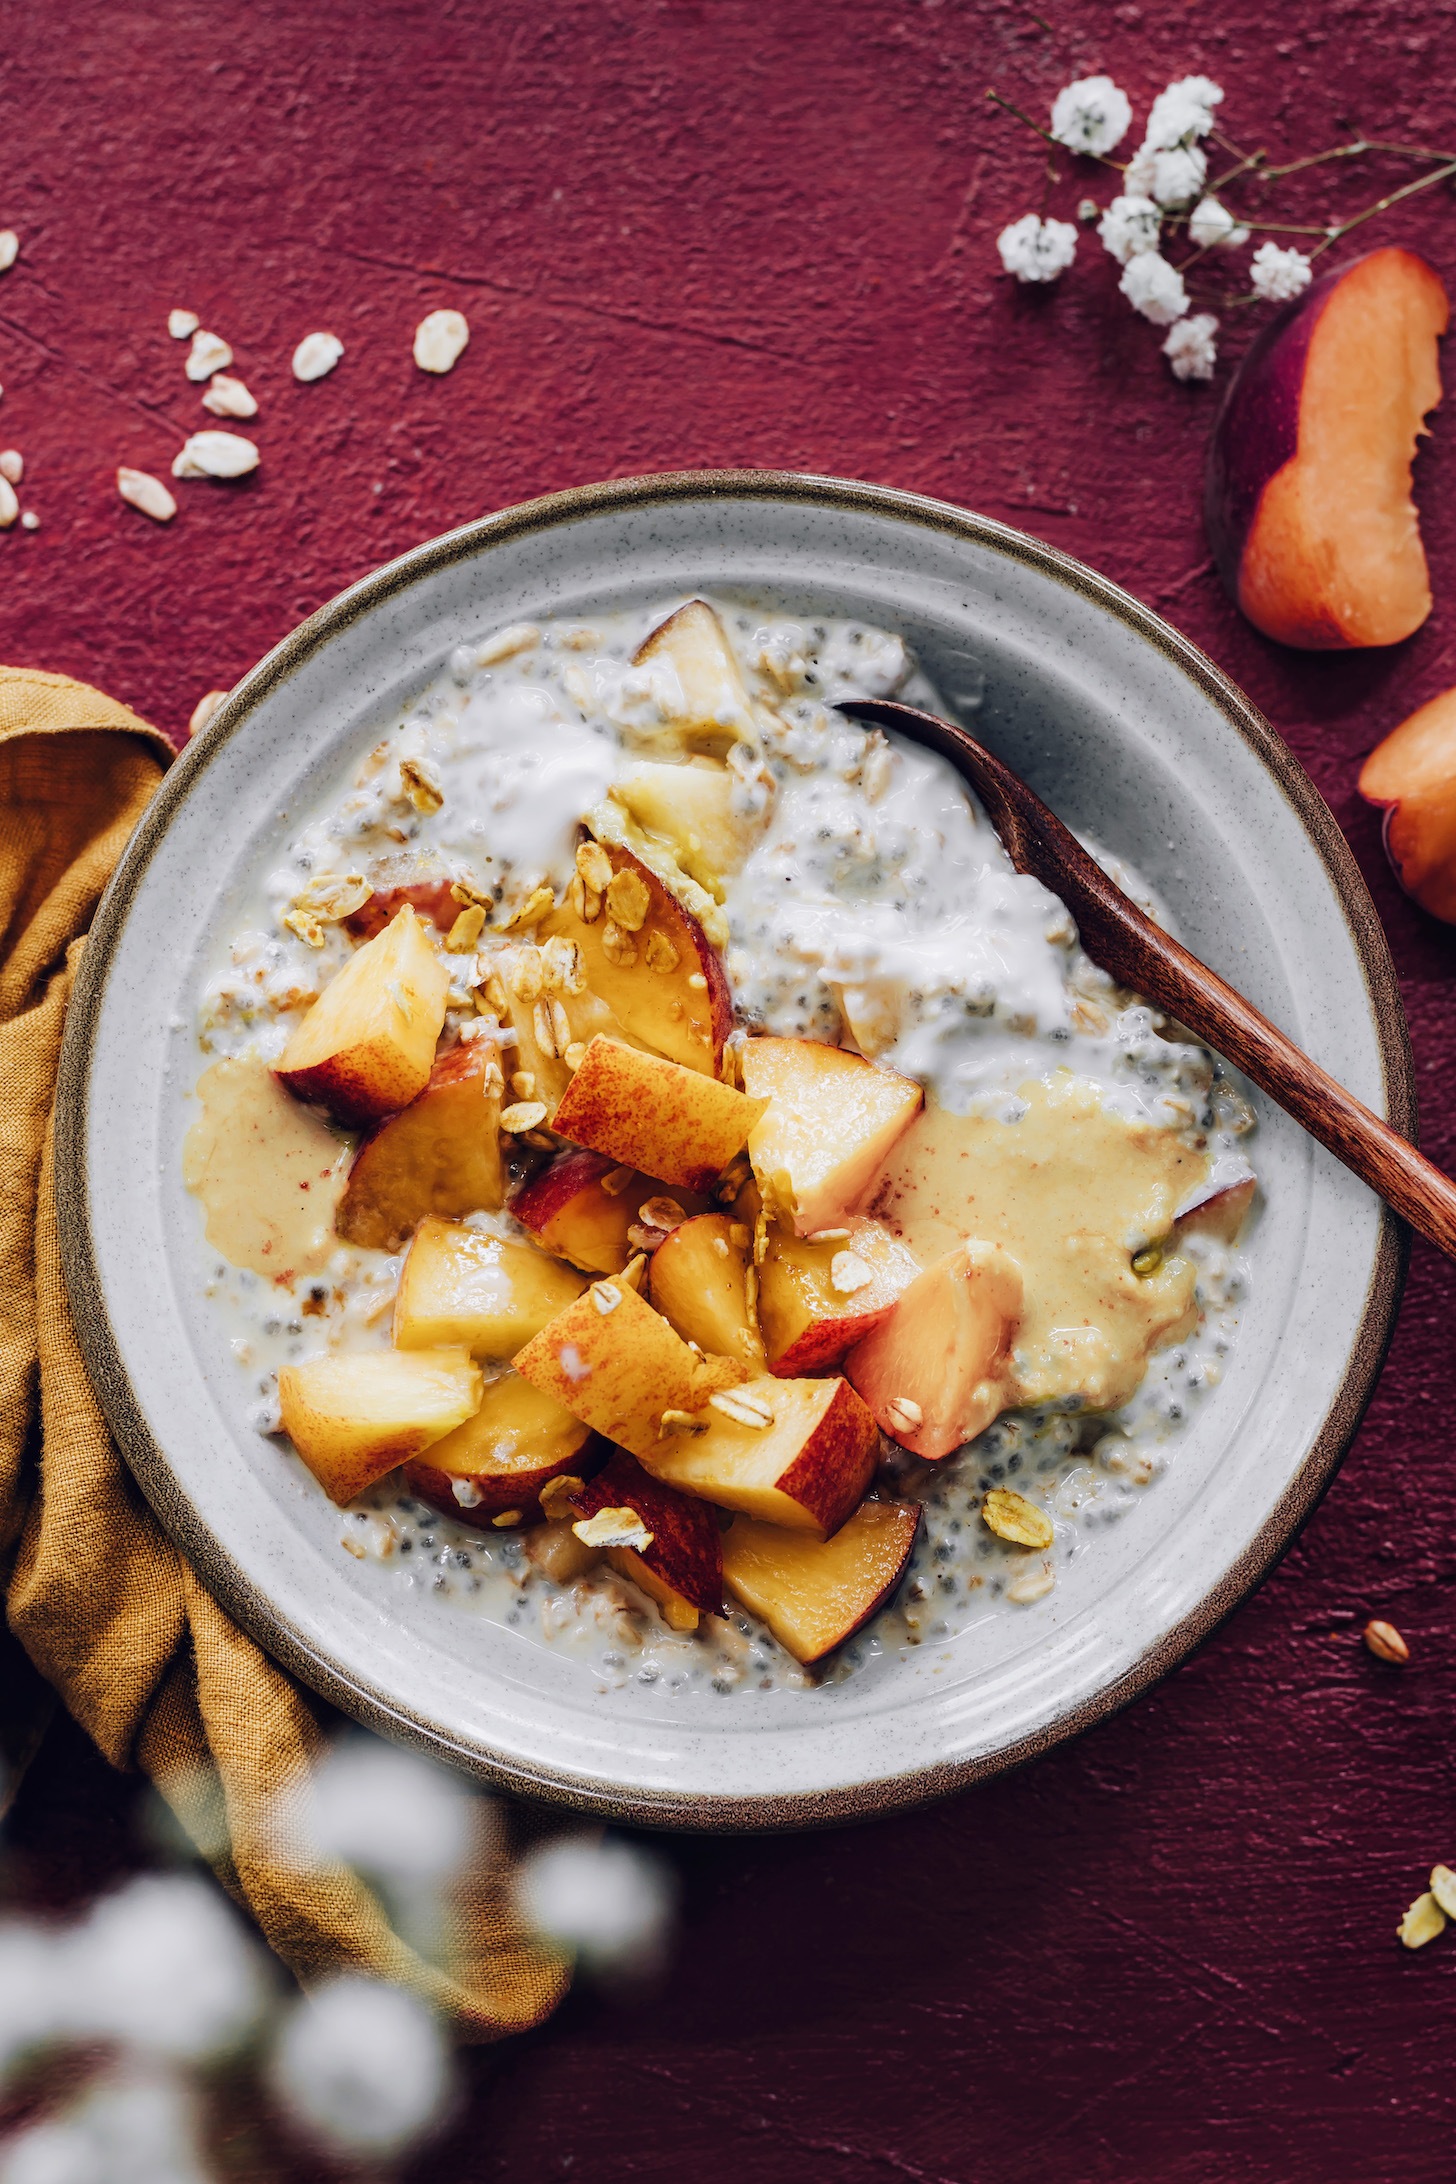 Fresh sliced peaches on top of a bowl of overnight oats